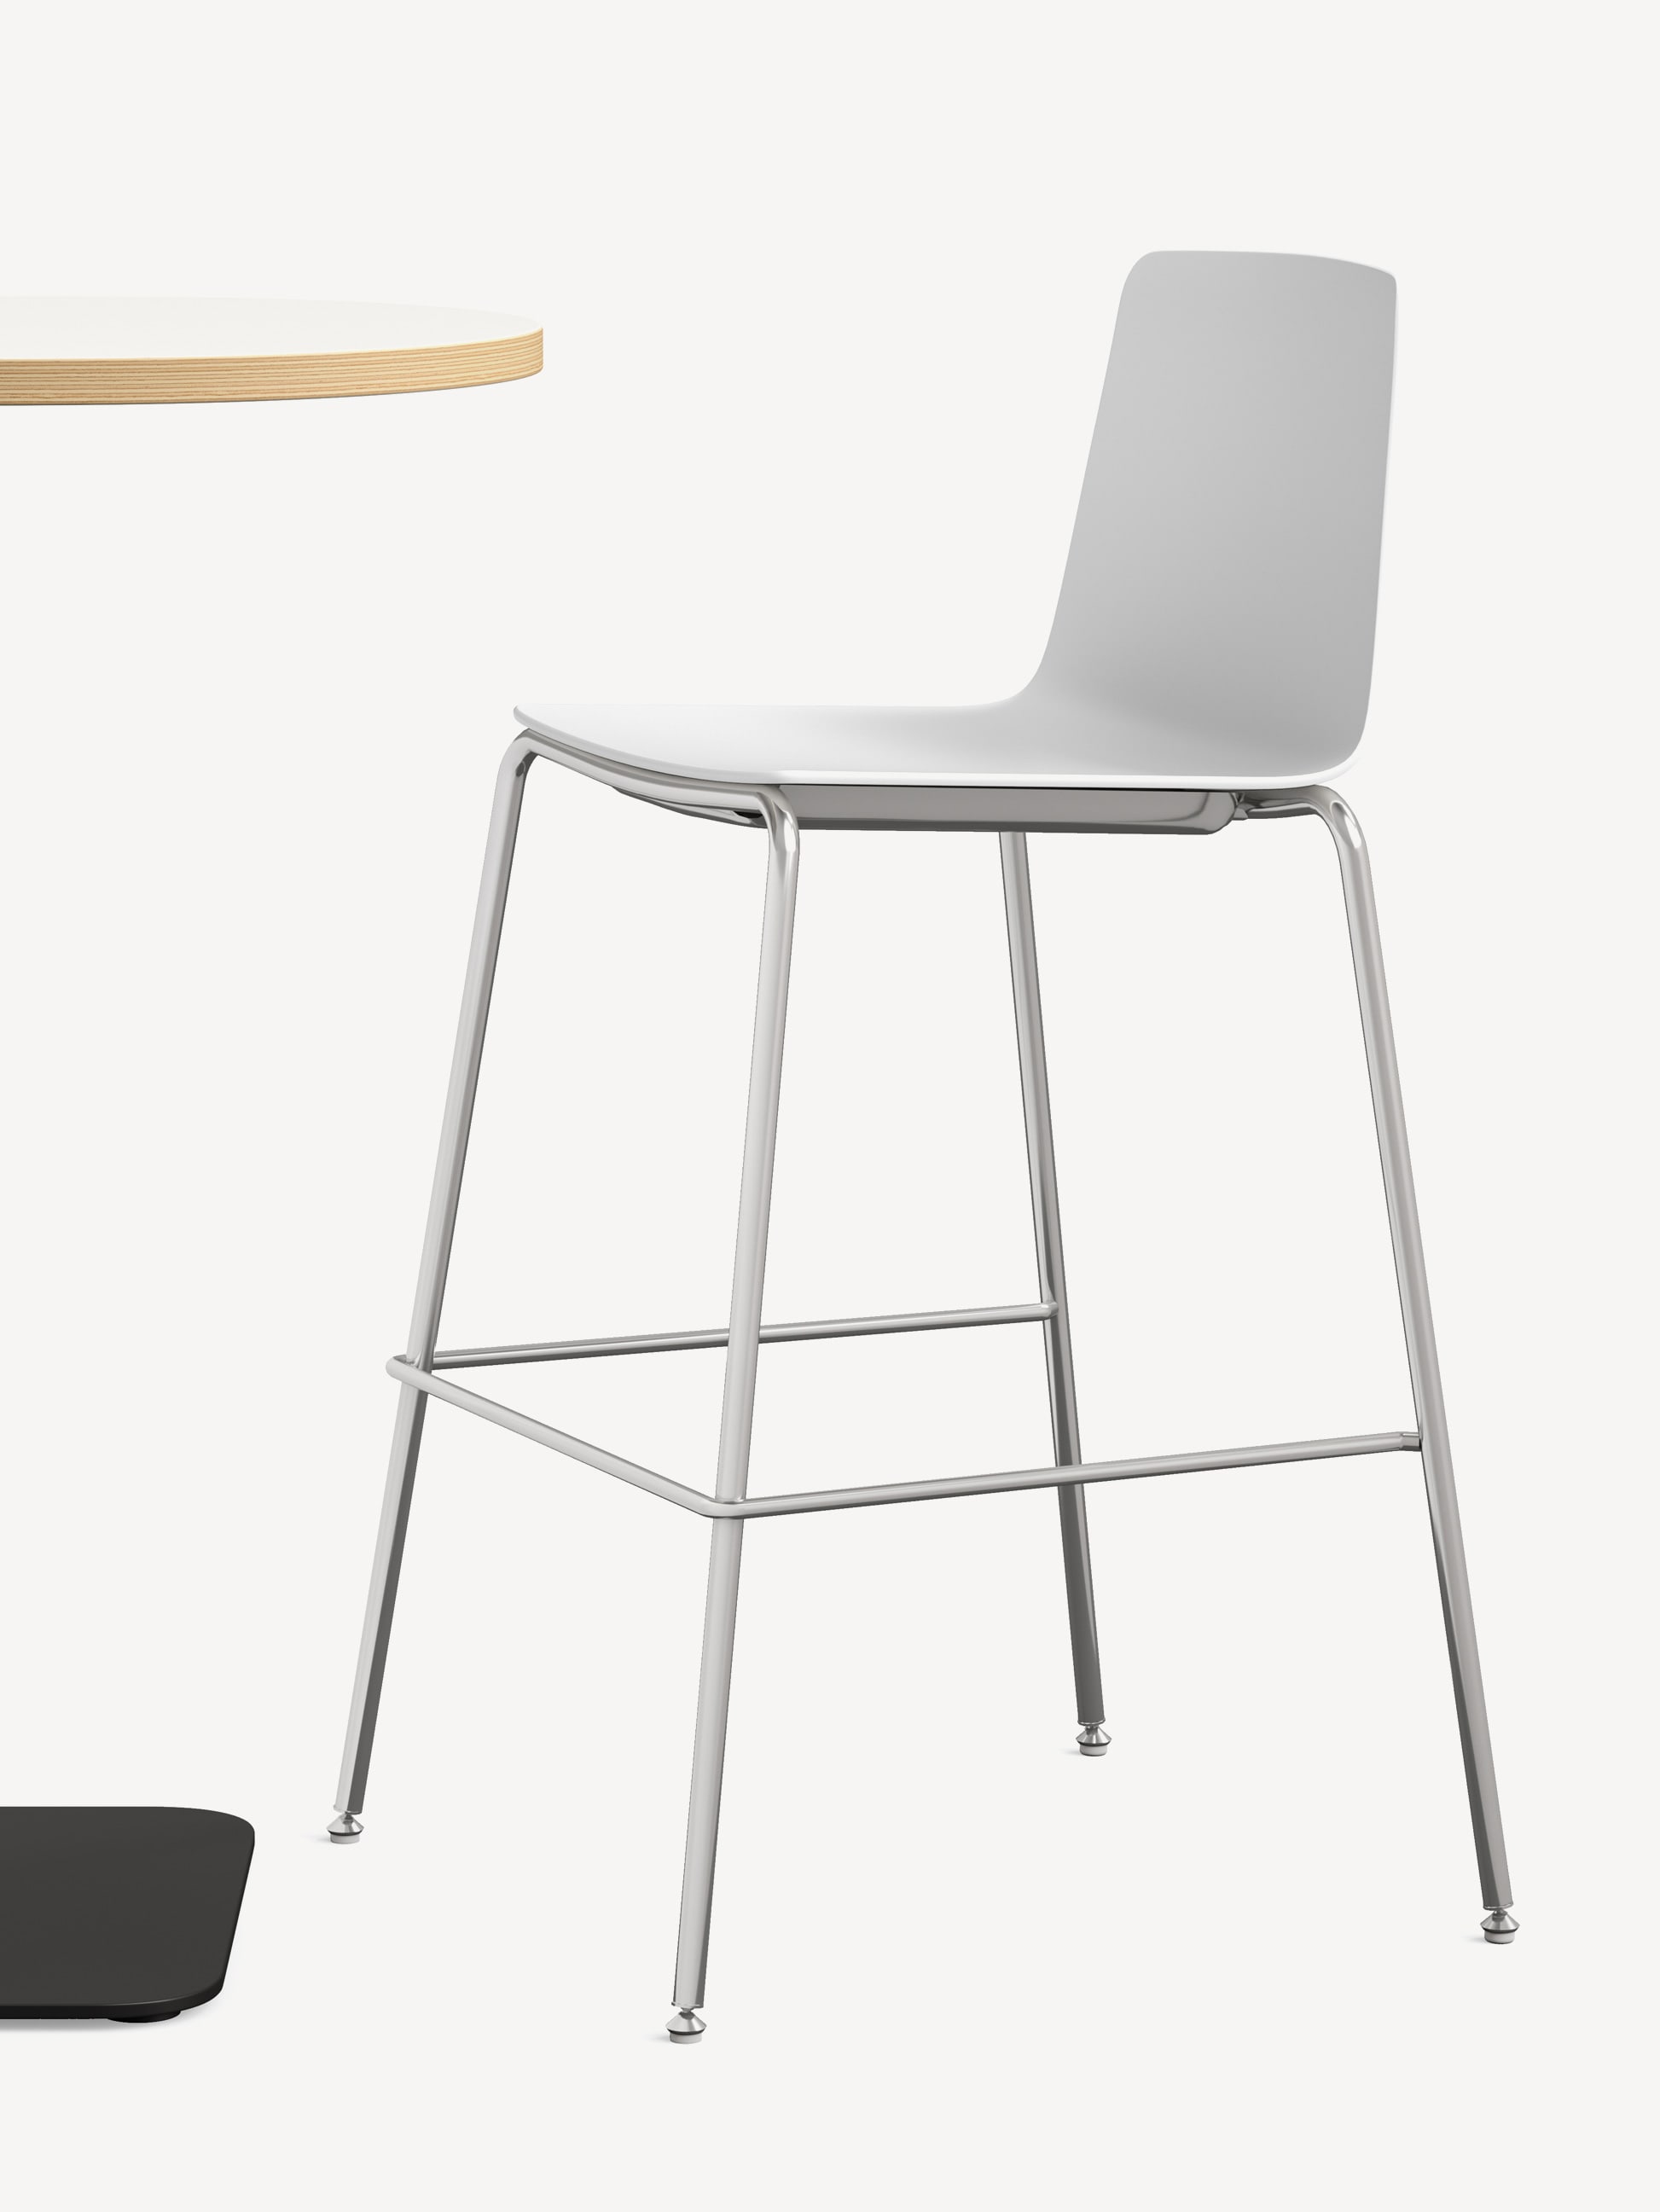 Three-quarter view of the 4-leg vicinity bar stool with a chrome frame and white polymer shell.